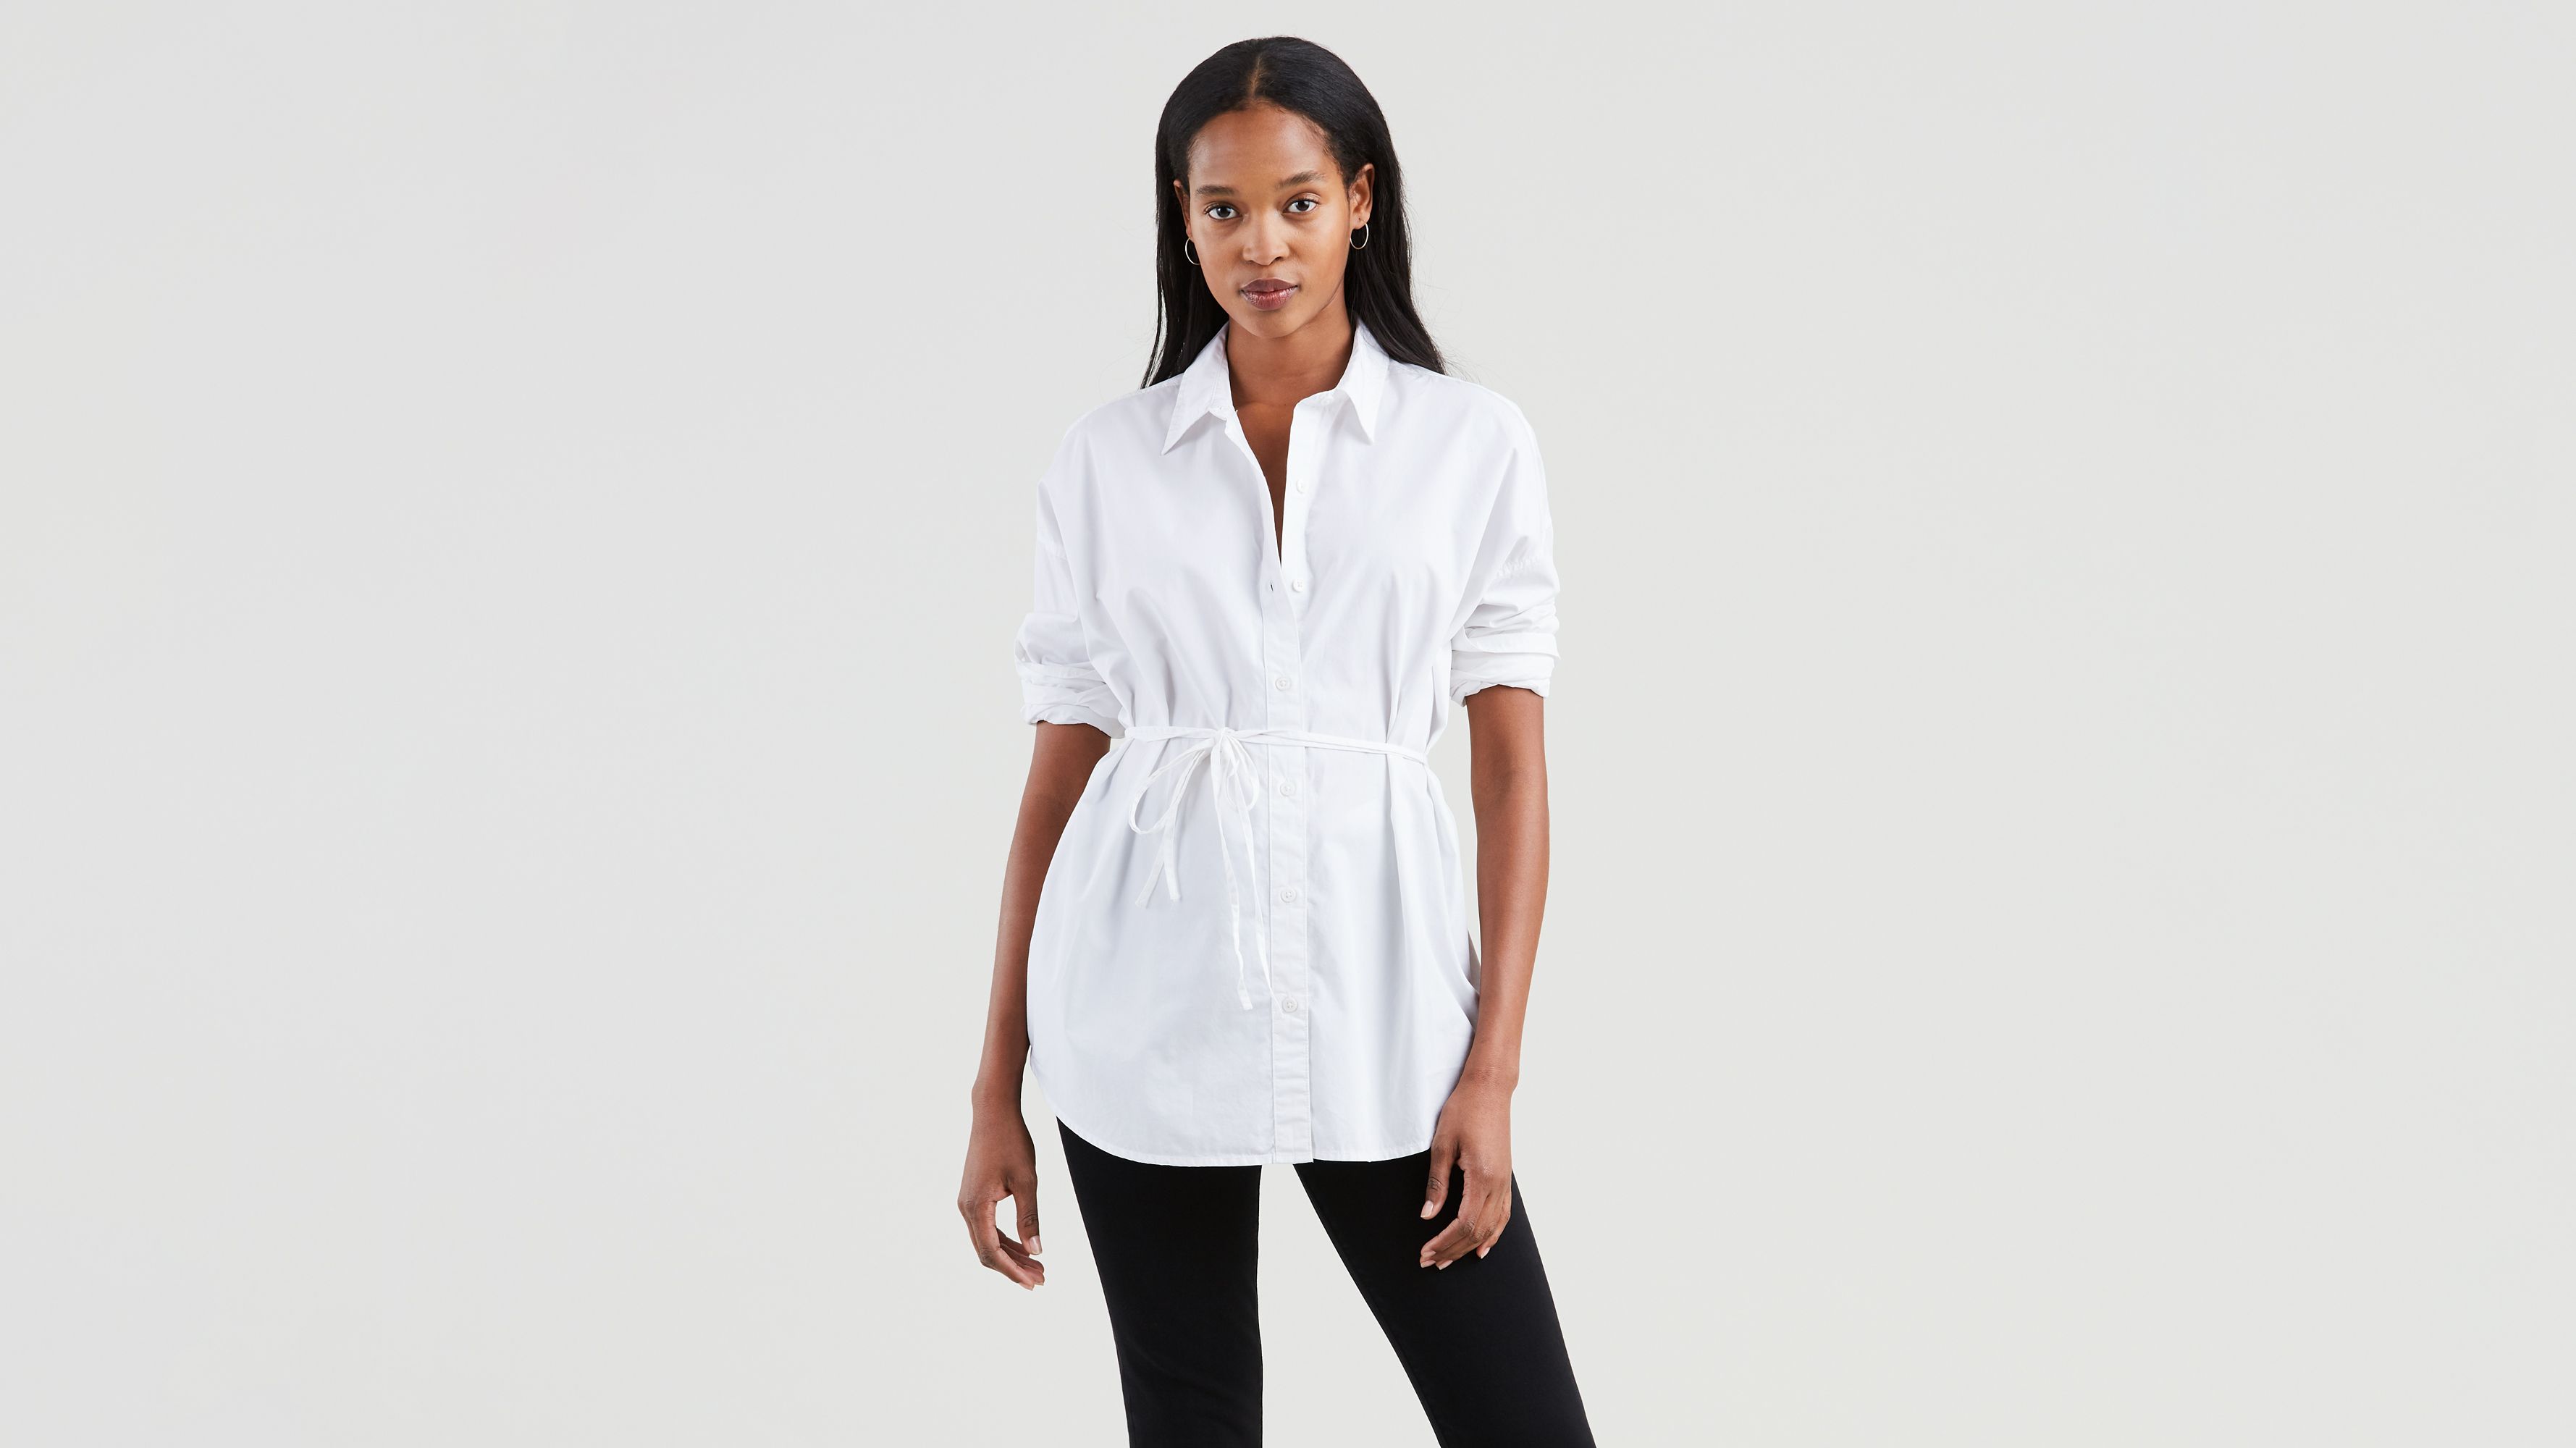 Painter Shirt With Tie - White | Levi's® US